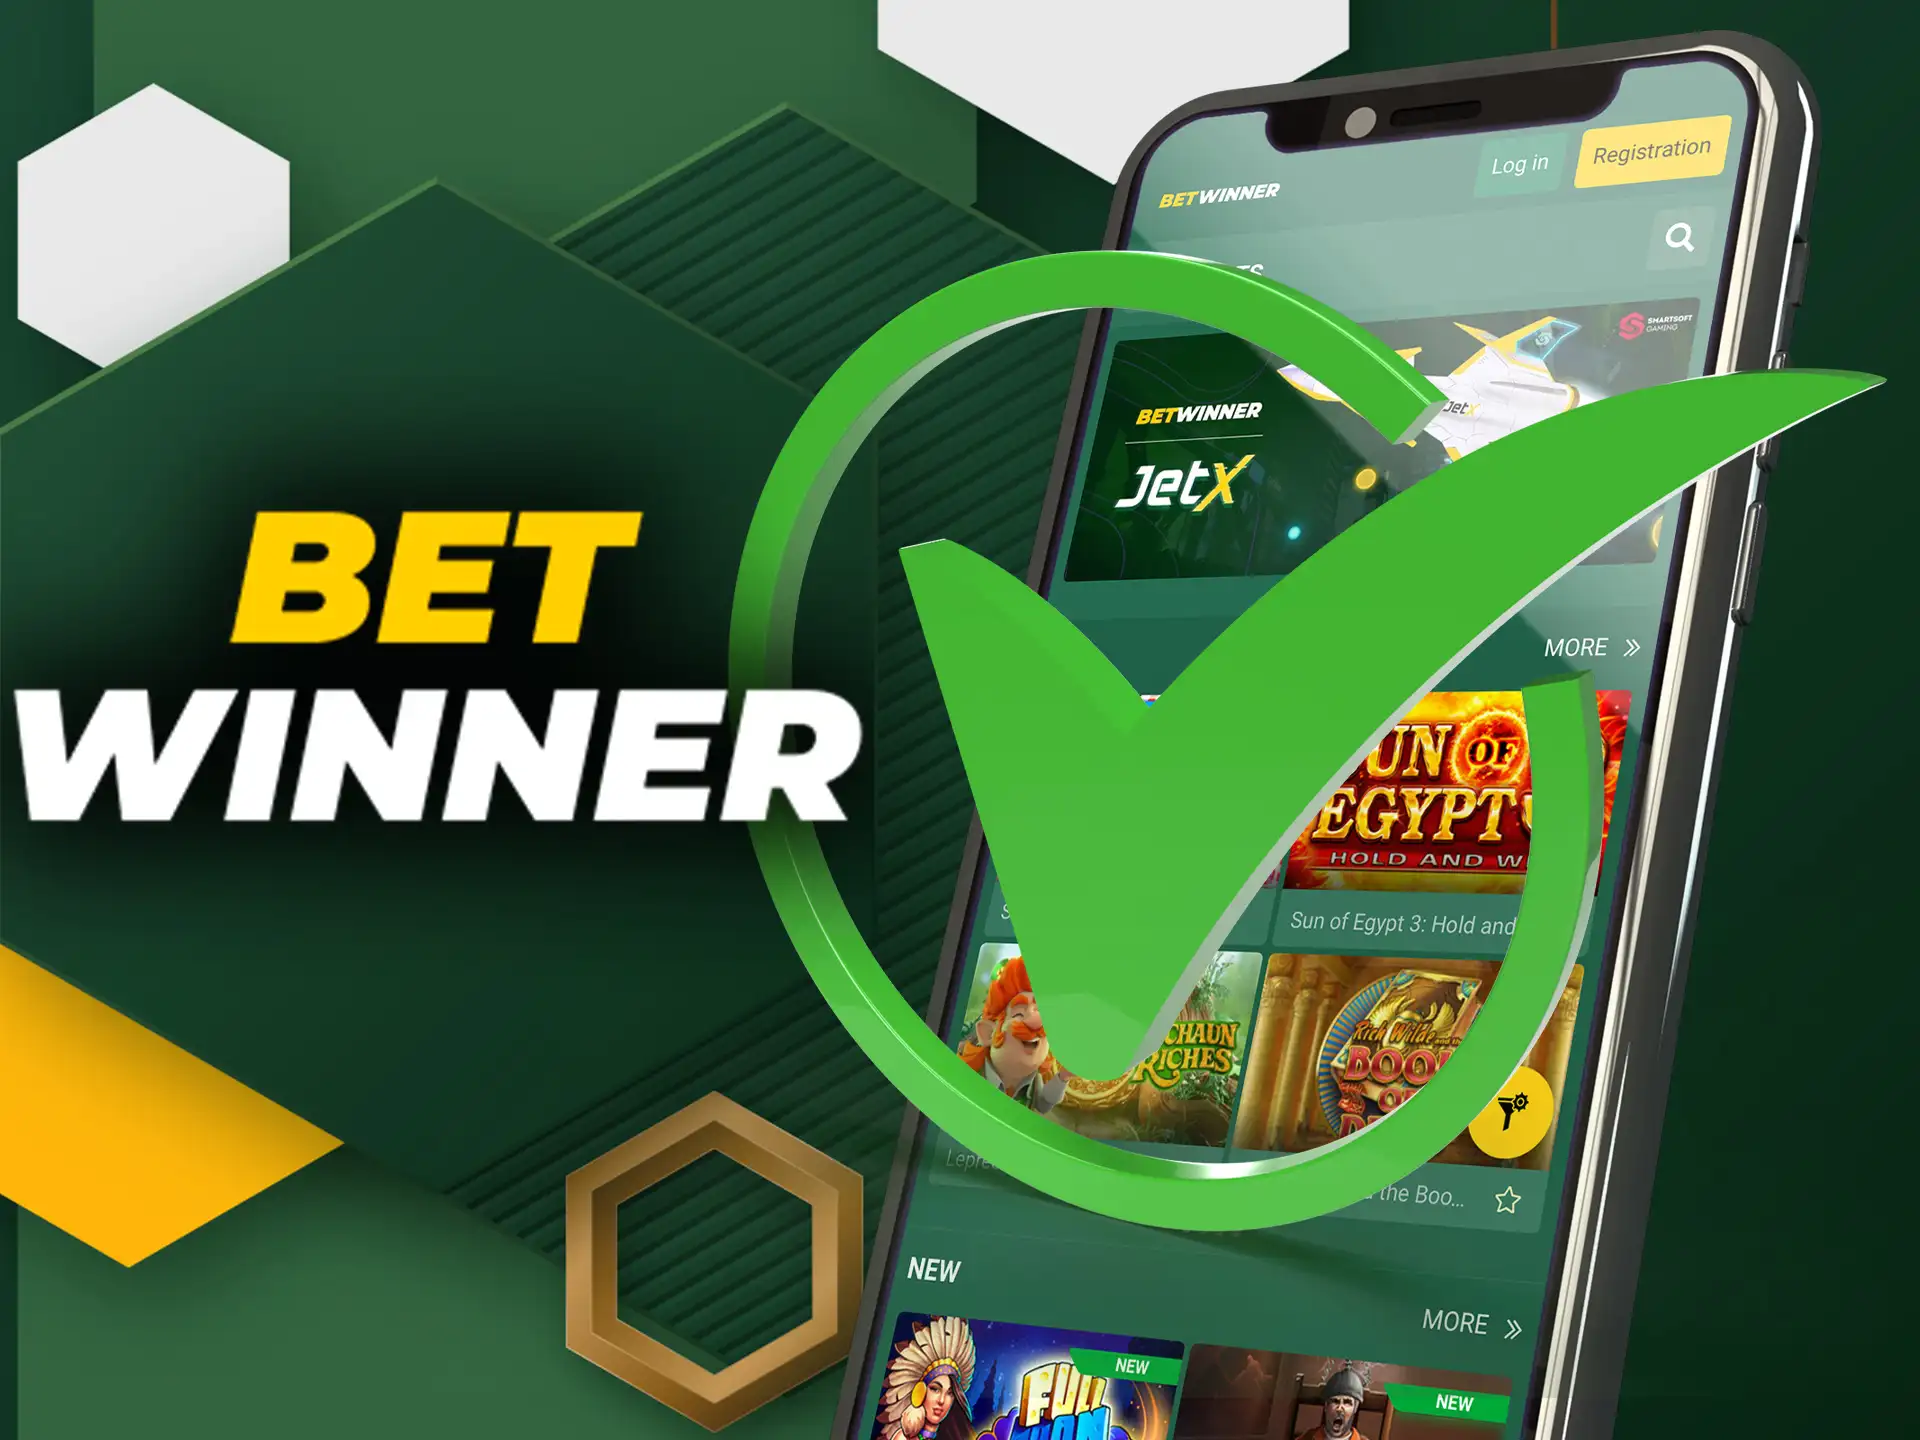 Play casino games and bet on sports with complete confidence at Betwinner.